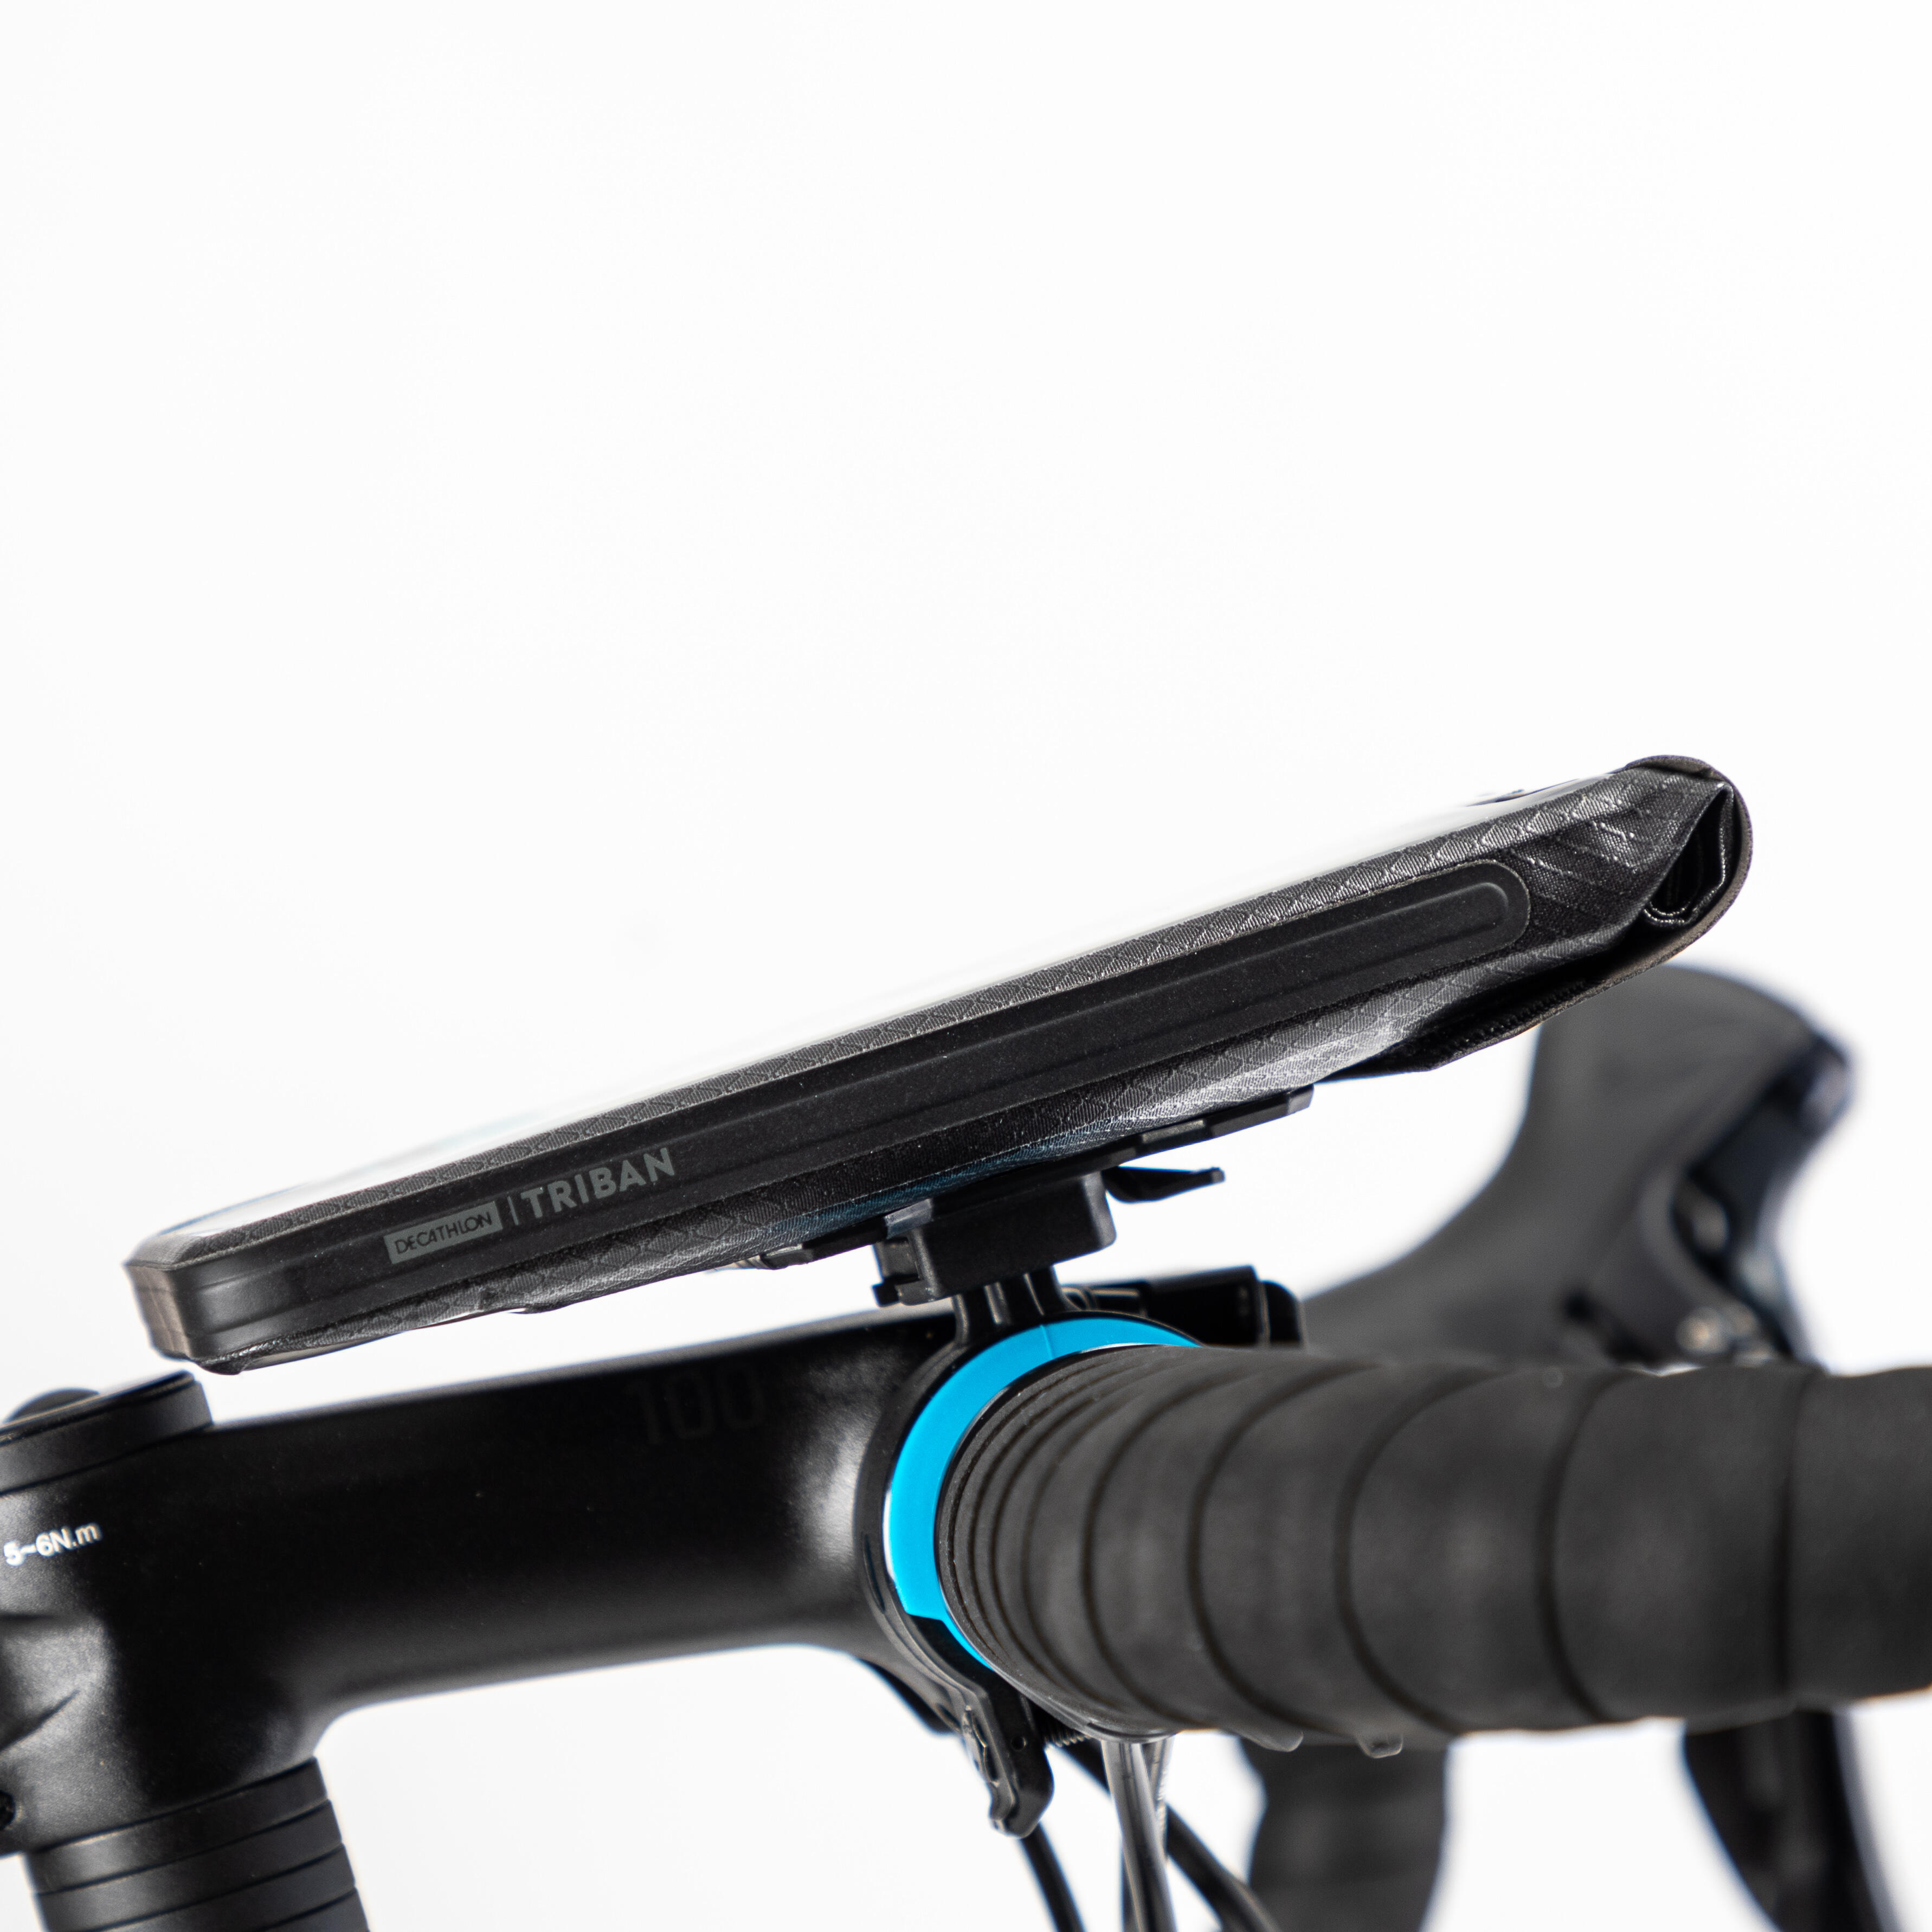 weather resistant bike mount for all smartphone stand